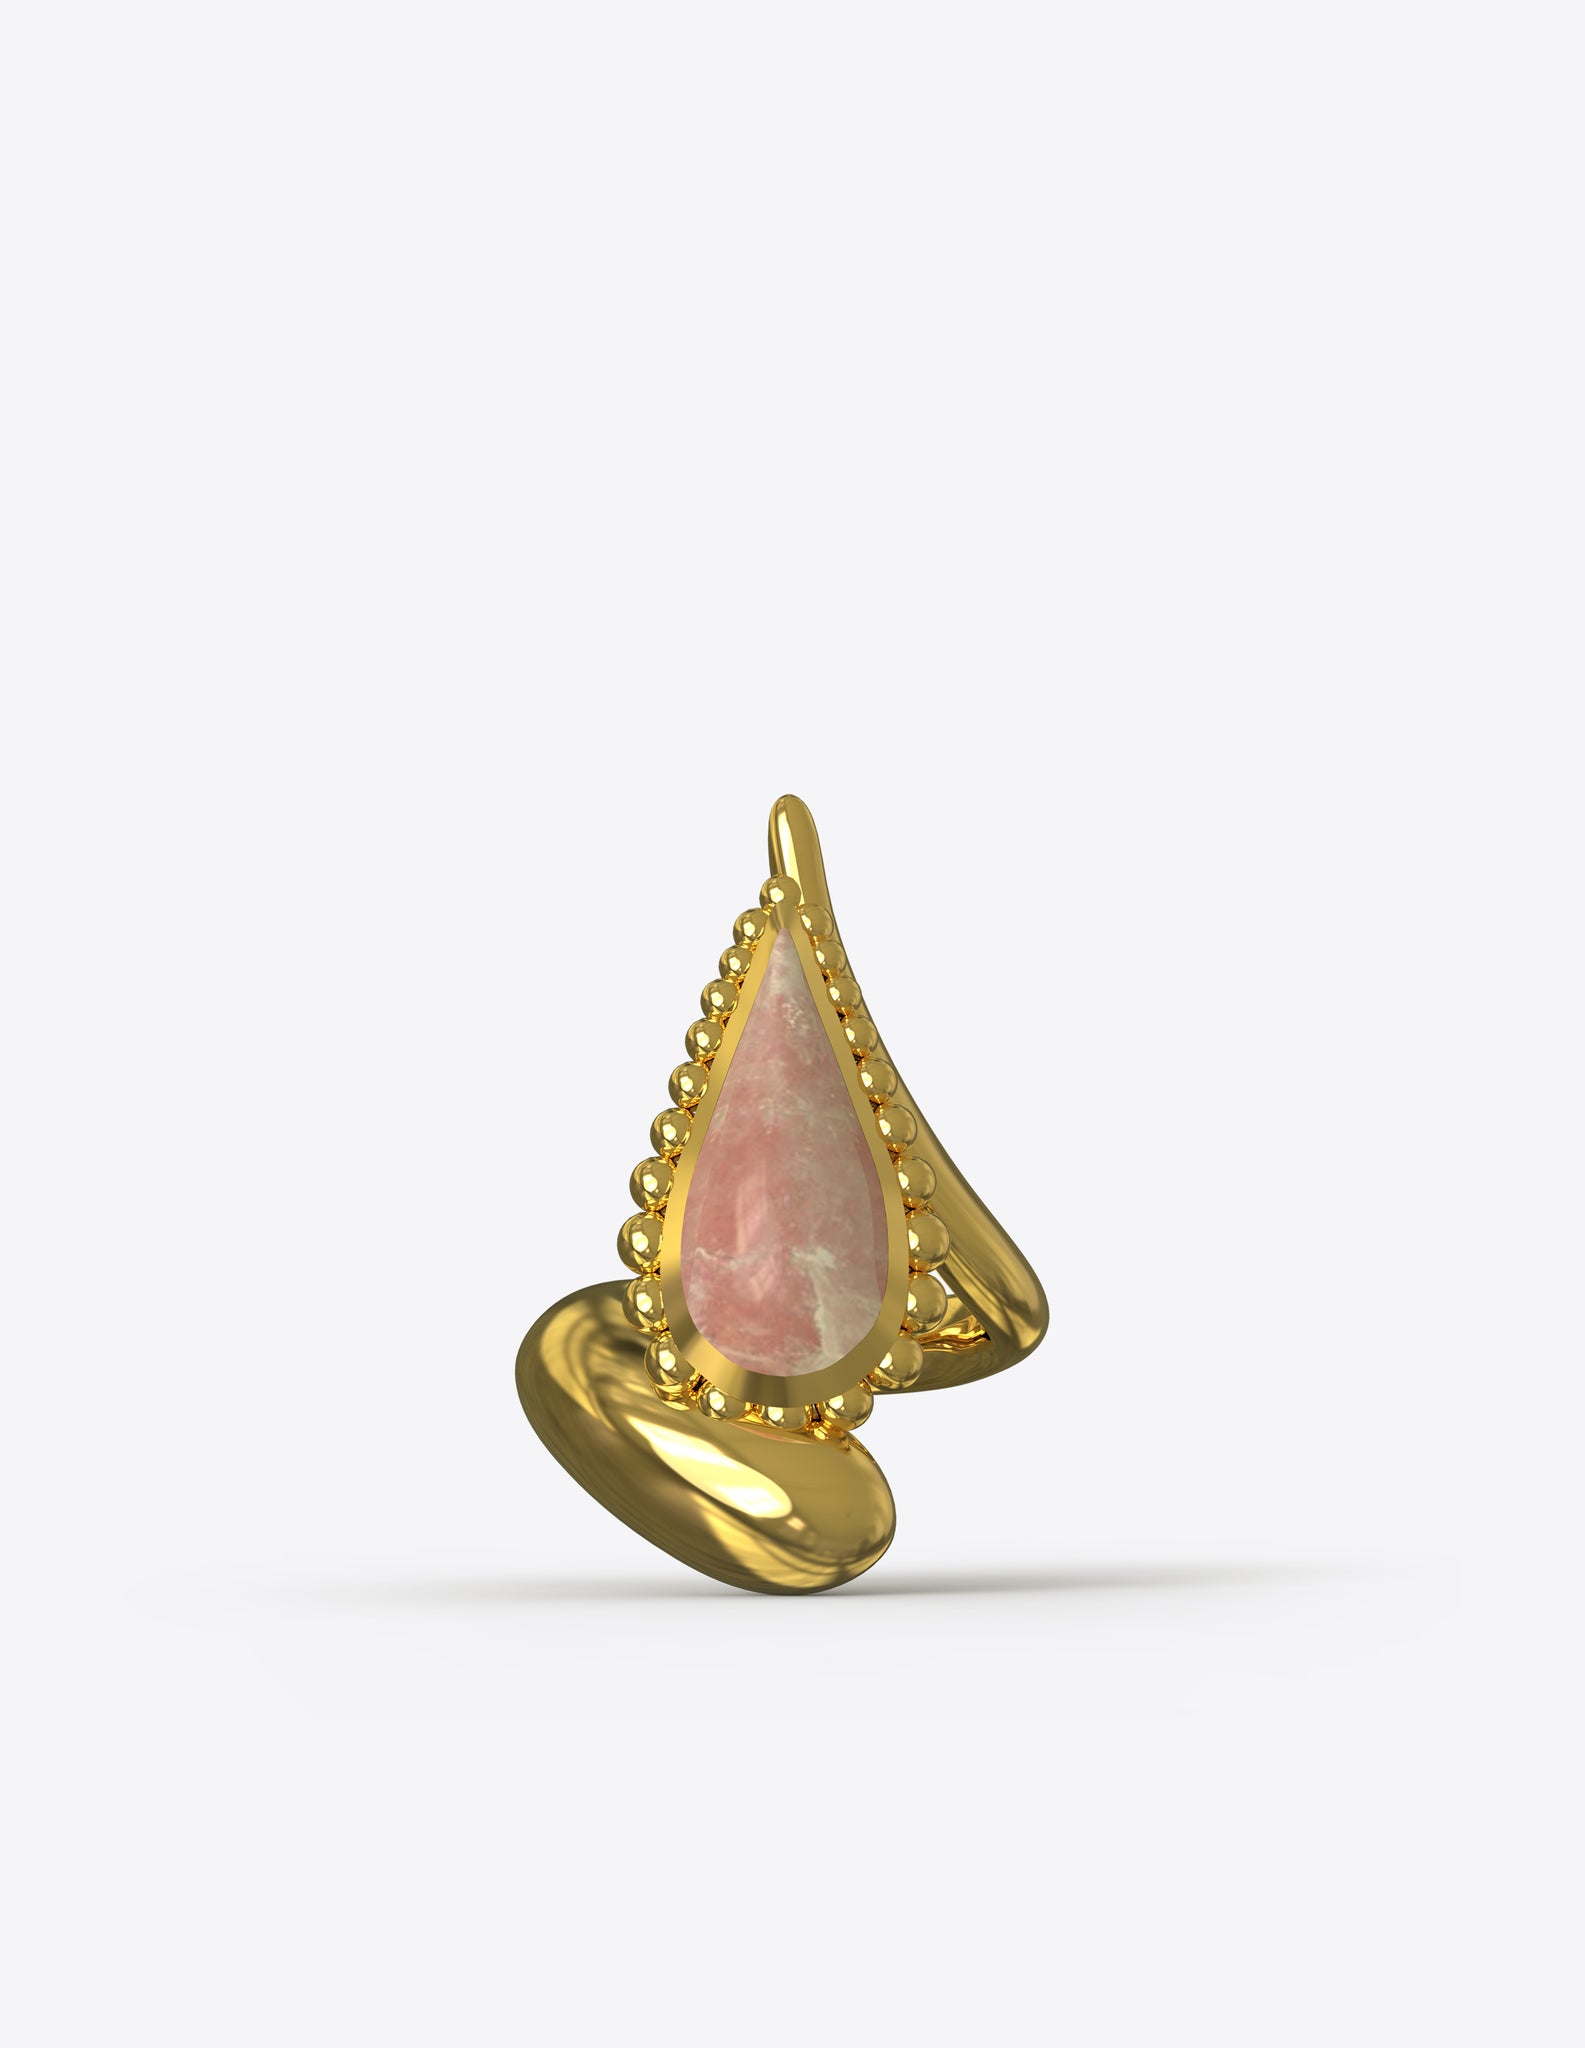 Compass Ring in Polished Gold Vermeil with Rose Quartz